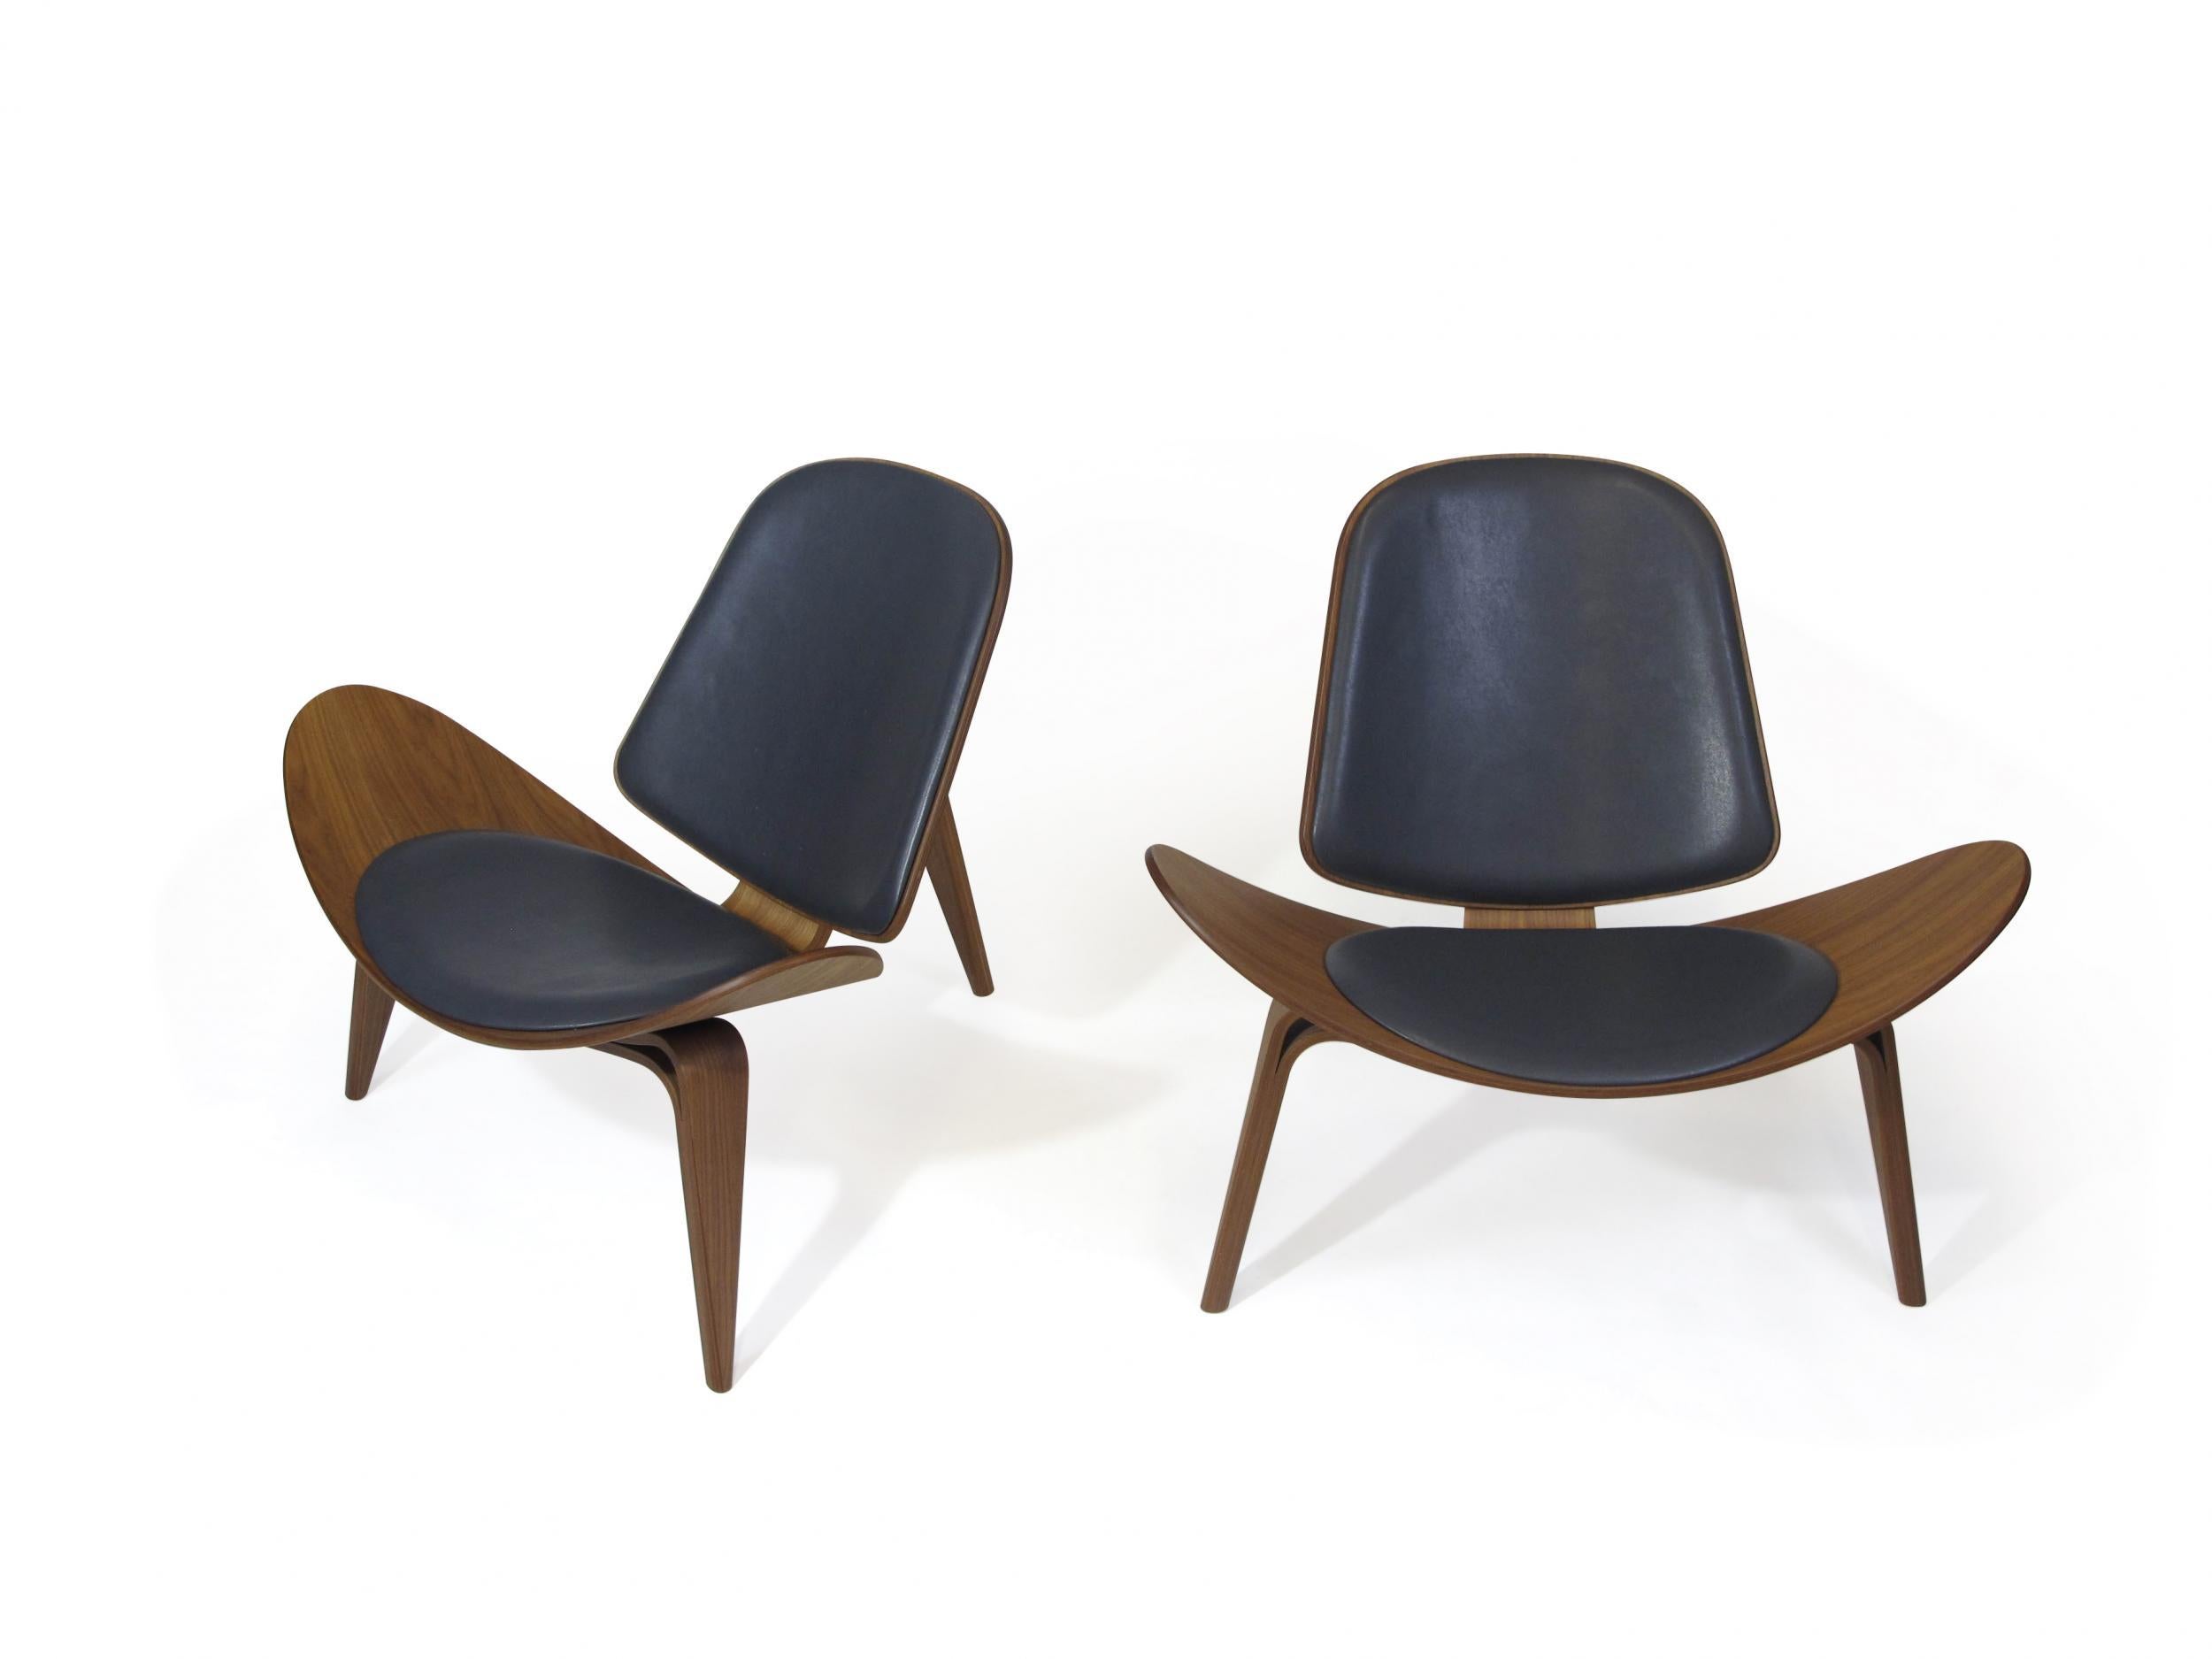 Pair of Hans Wegner shell chairs for Carl Hansen & Son model CH 07. Chairs are crafted of bentwood walnut, with upholstered seats and backs in black leather. The chair has a Carl Hansen label with a serial number attached underneath the